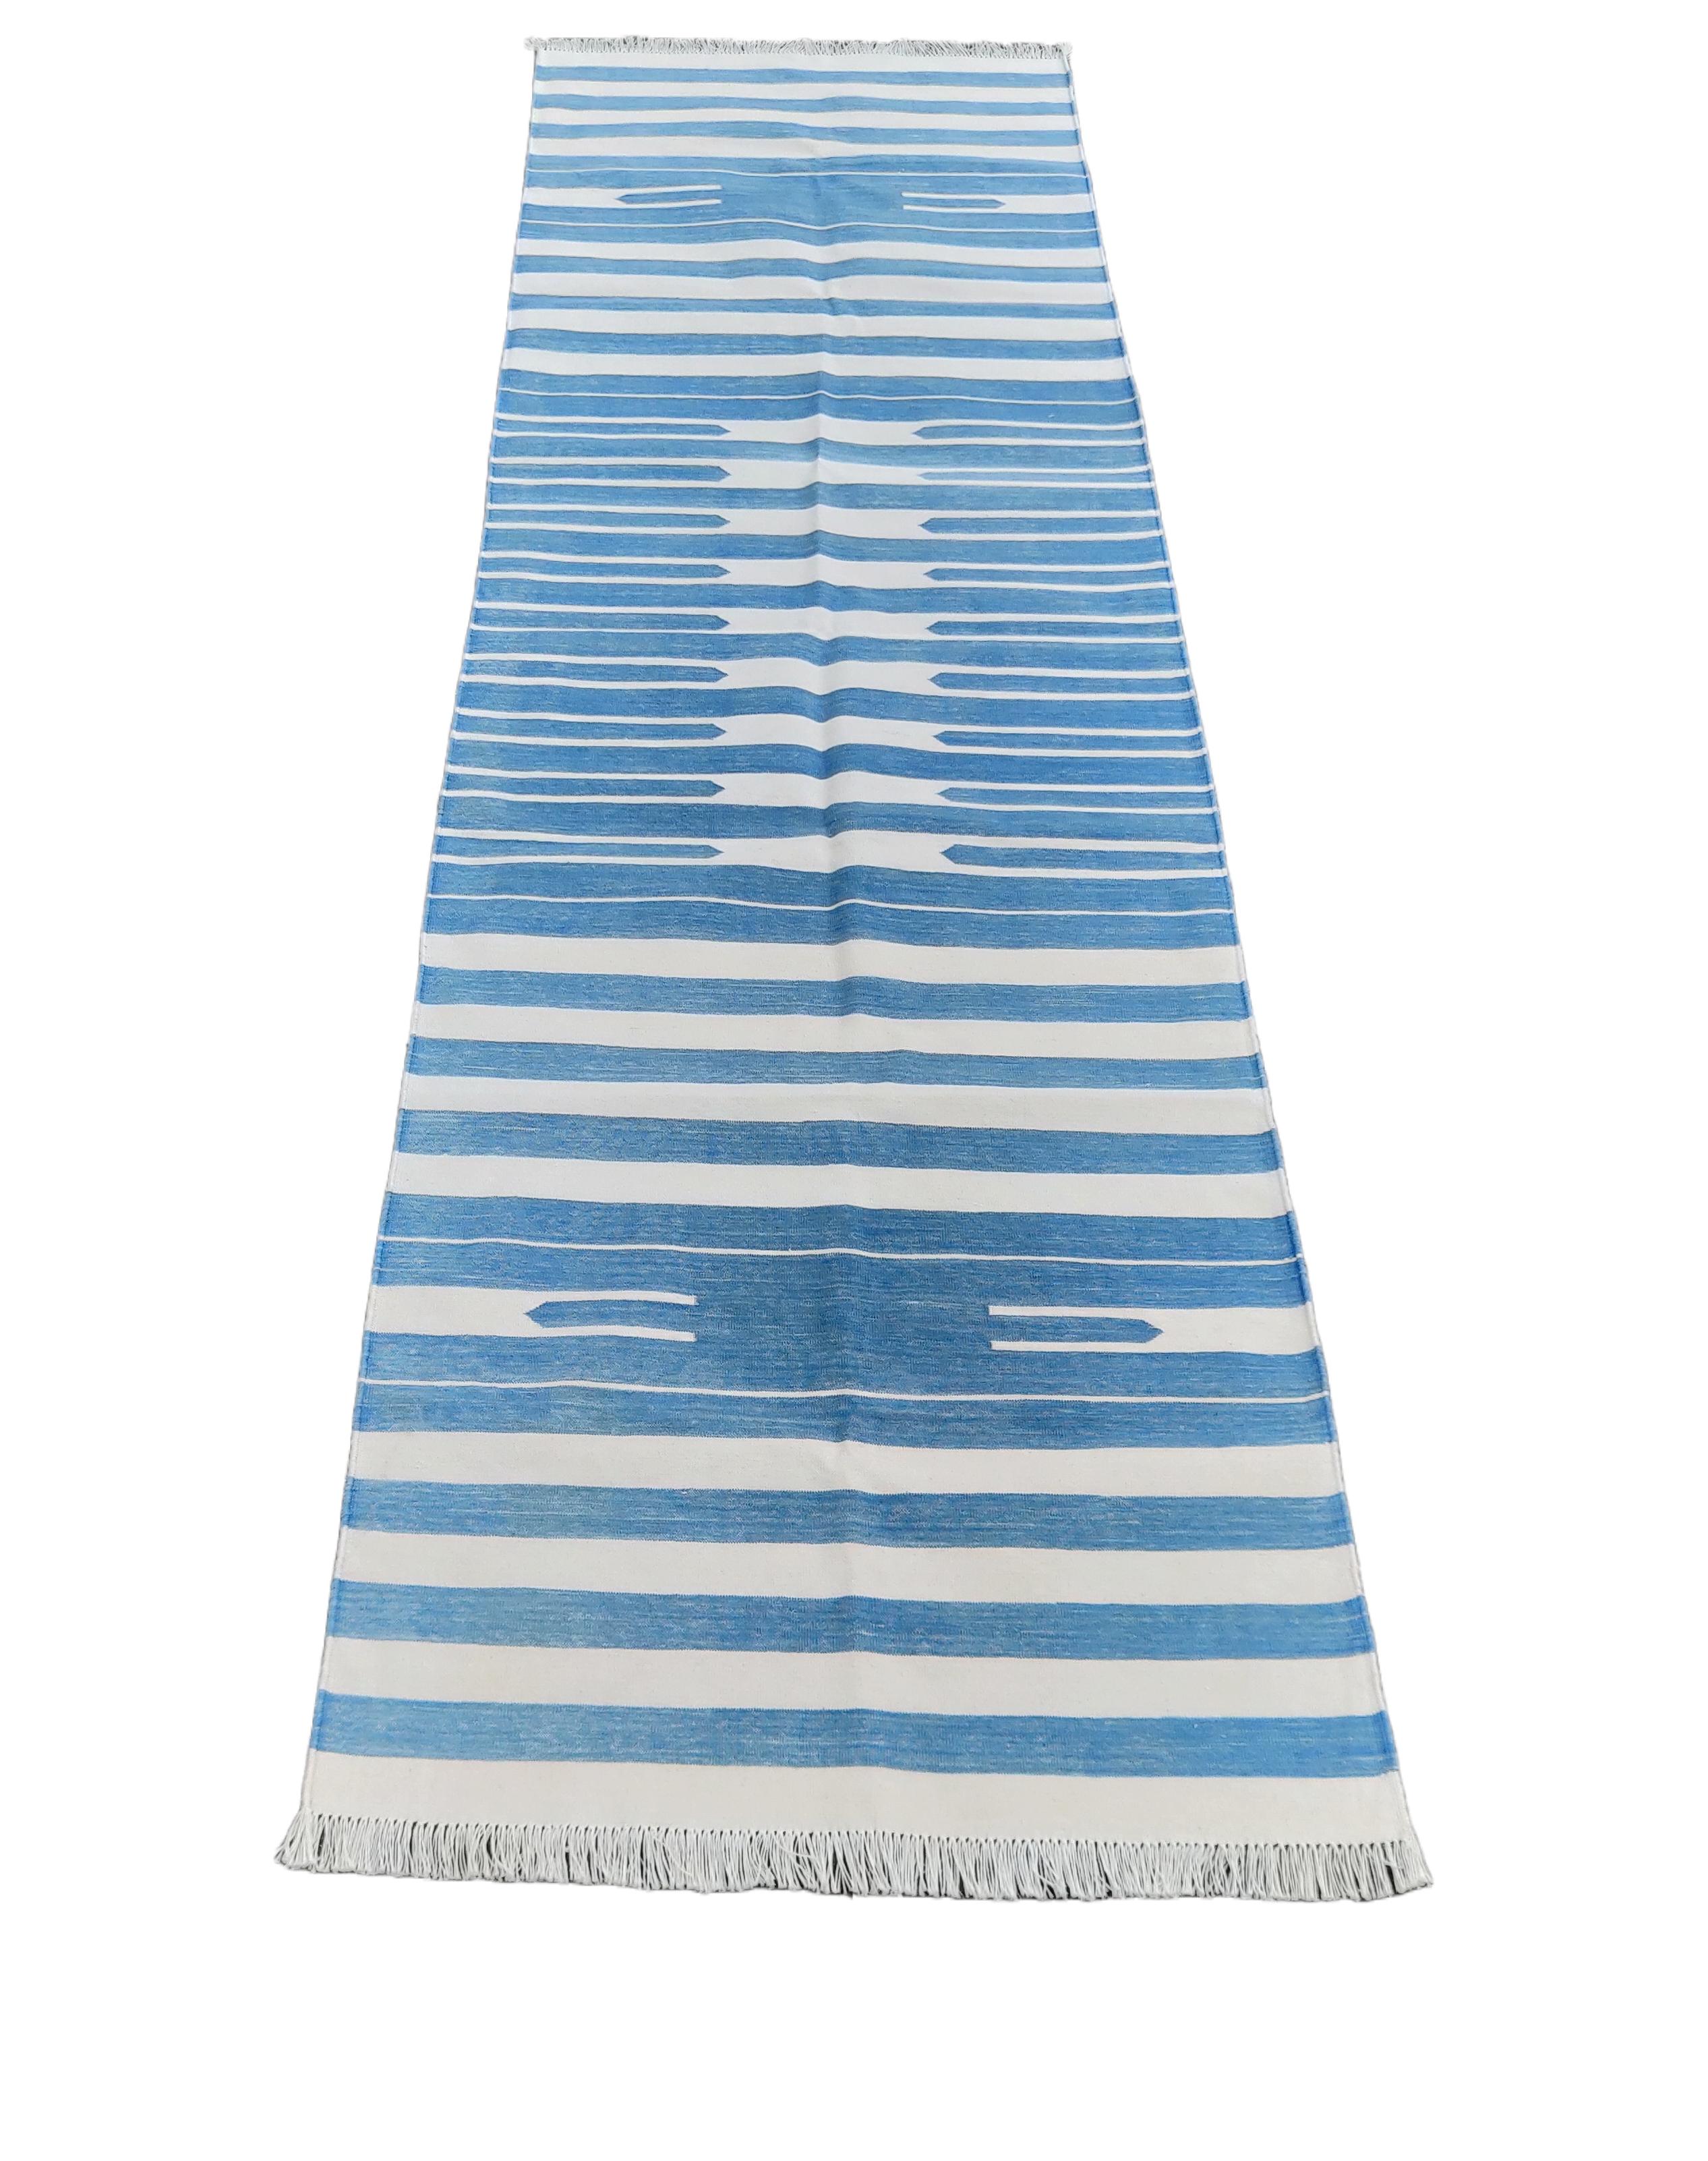 Mid-Century Modern Handmade Cotton Area Flat Weave Runner, 3x10 Blue And White Striped Dhurrie Rug For Sale